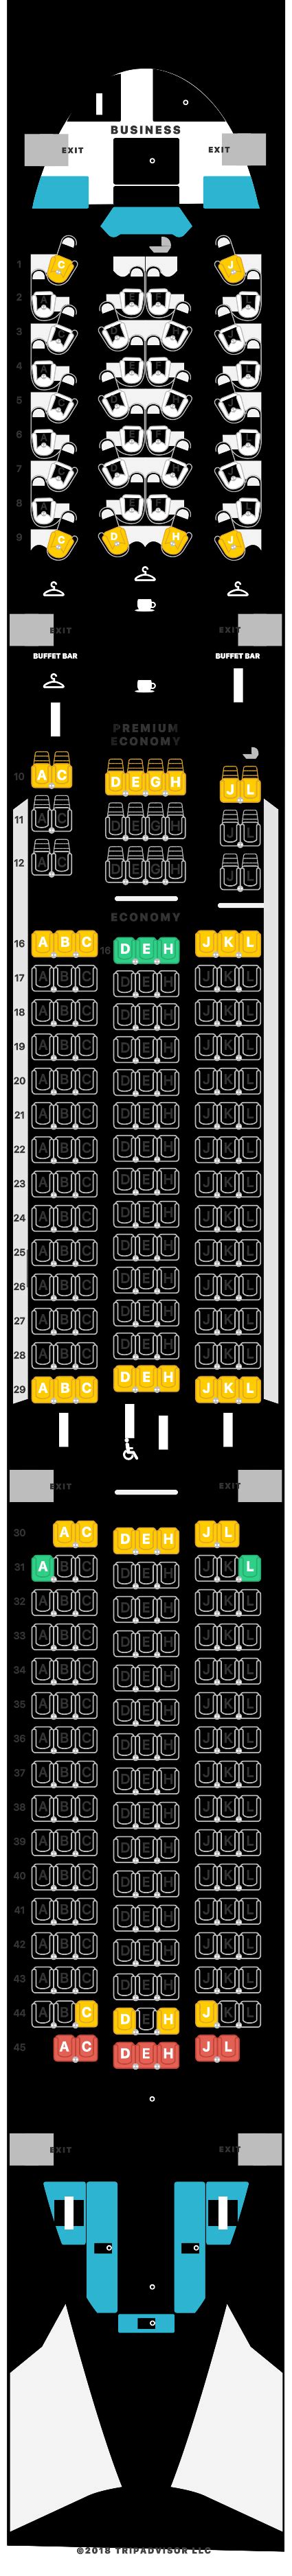 Air France A350 900 Seating Chart Image To U